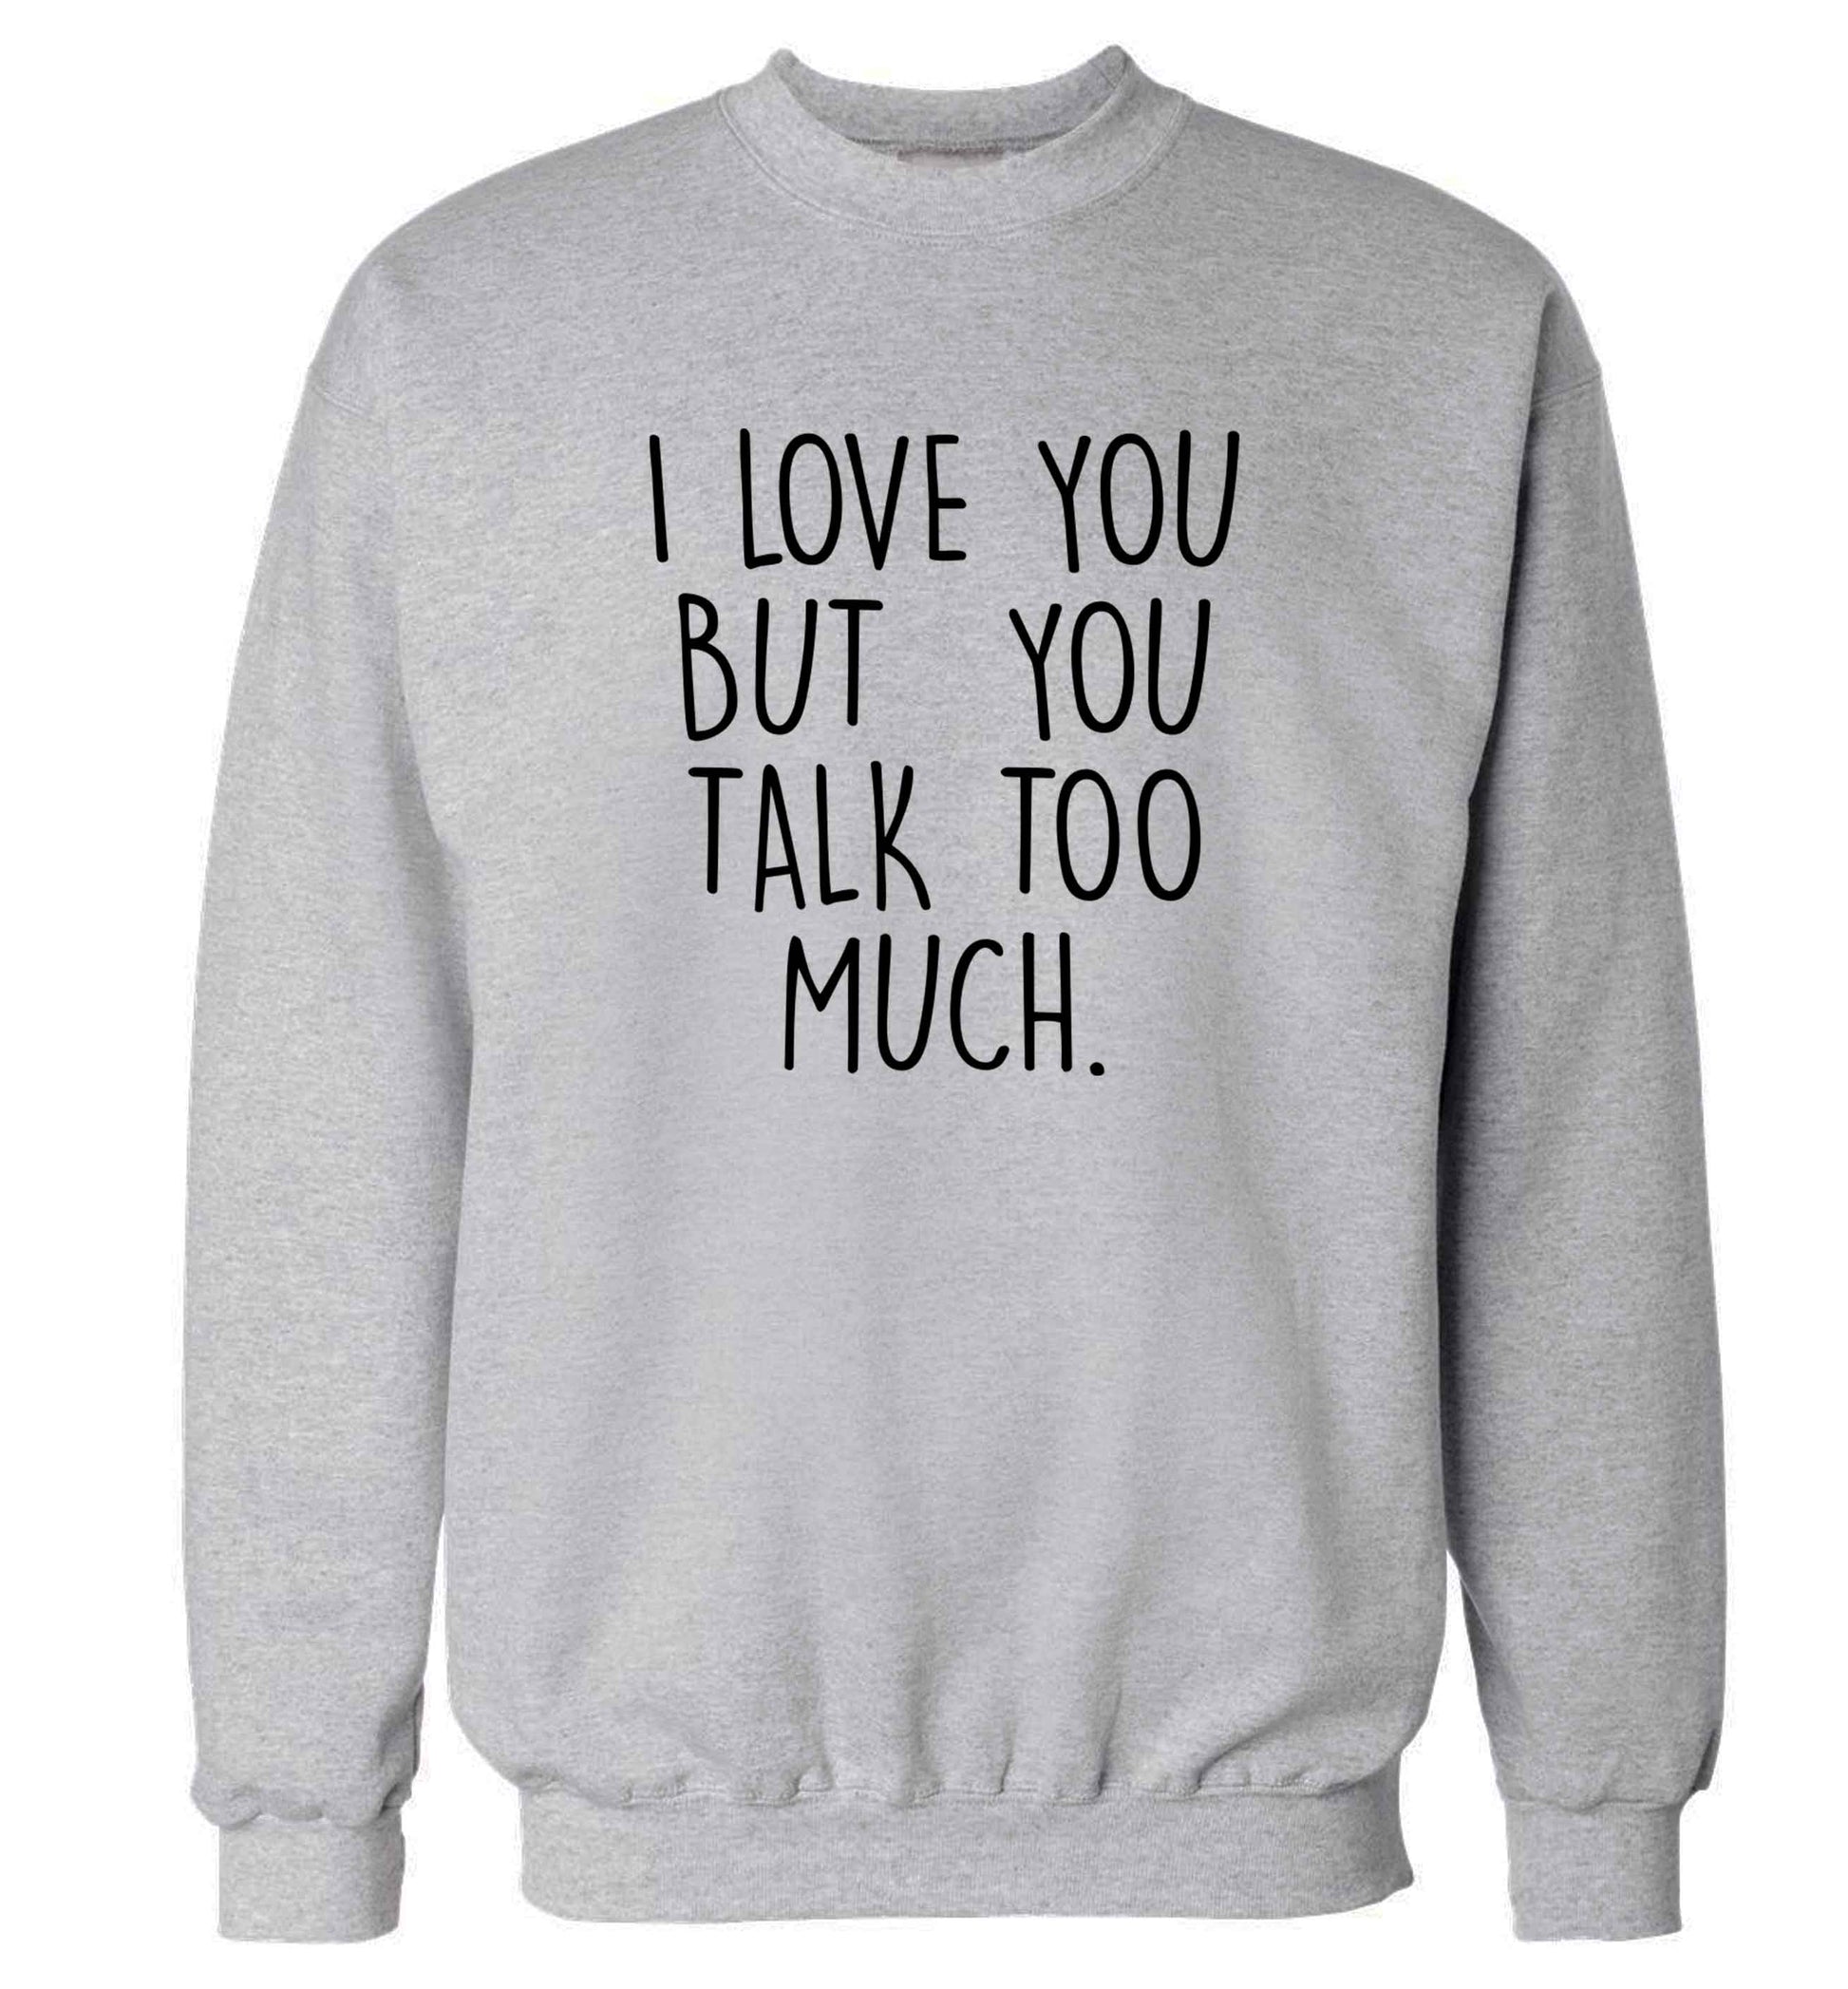 I love you but you talk too much adult's unisex grey sweater 2XL